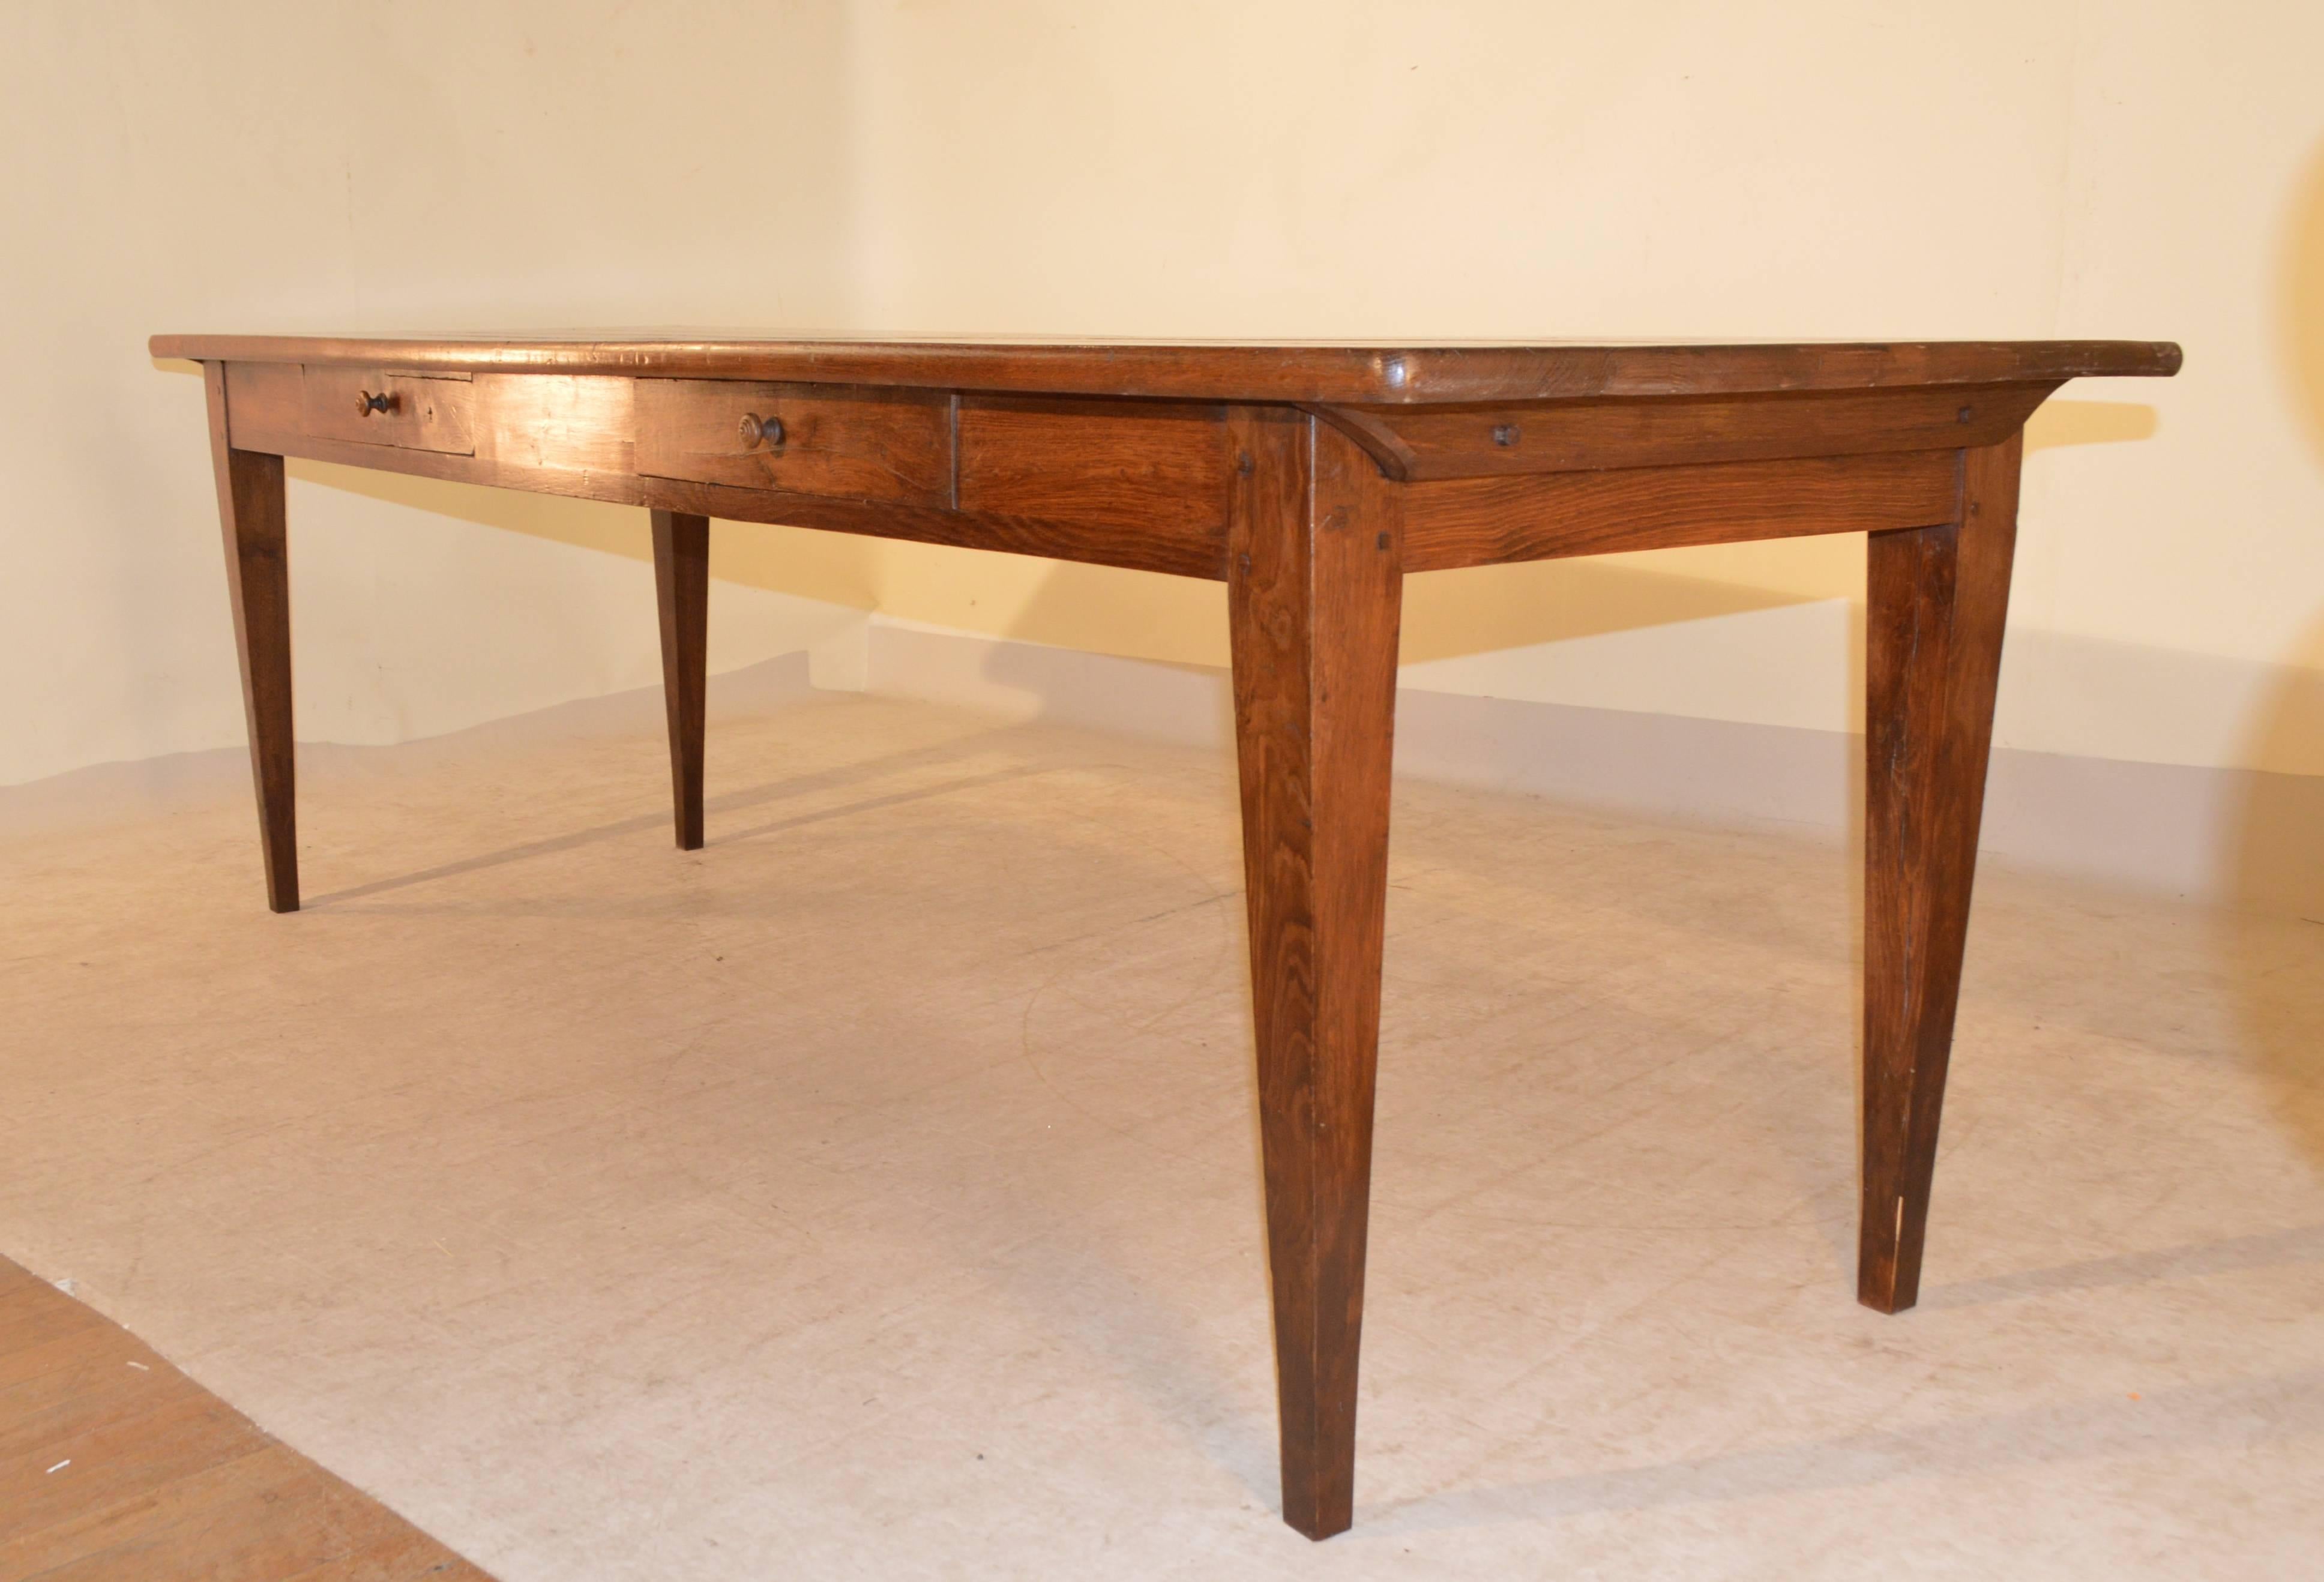 19th century French farm table with four plank top, following down to a simple apron containing two drawers, and tapered legs. One of the drawers has a money box enclosure, which is really unusual. The apron measures 24.75